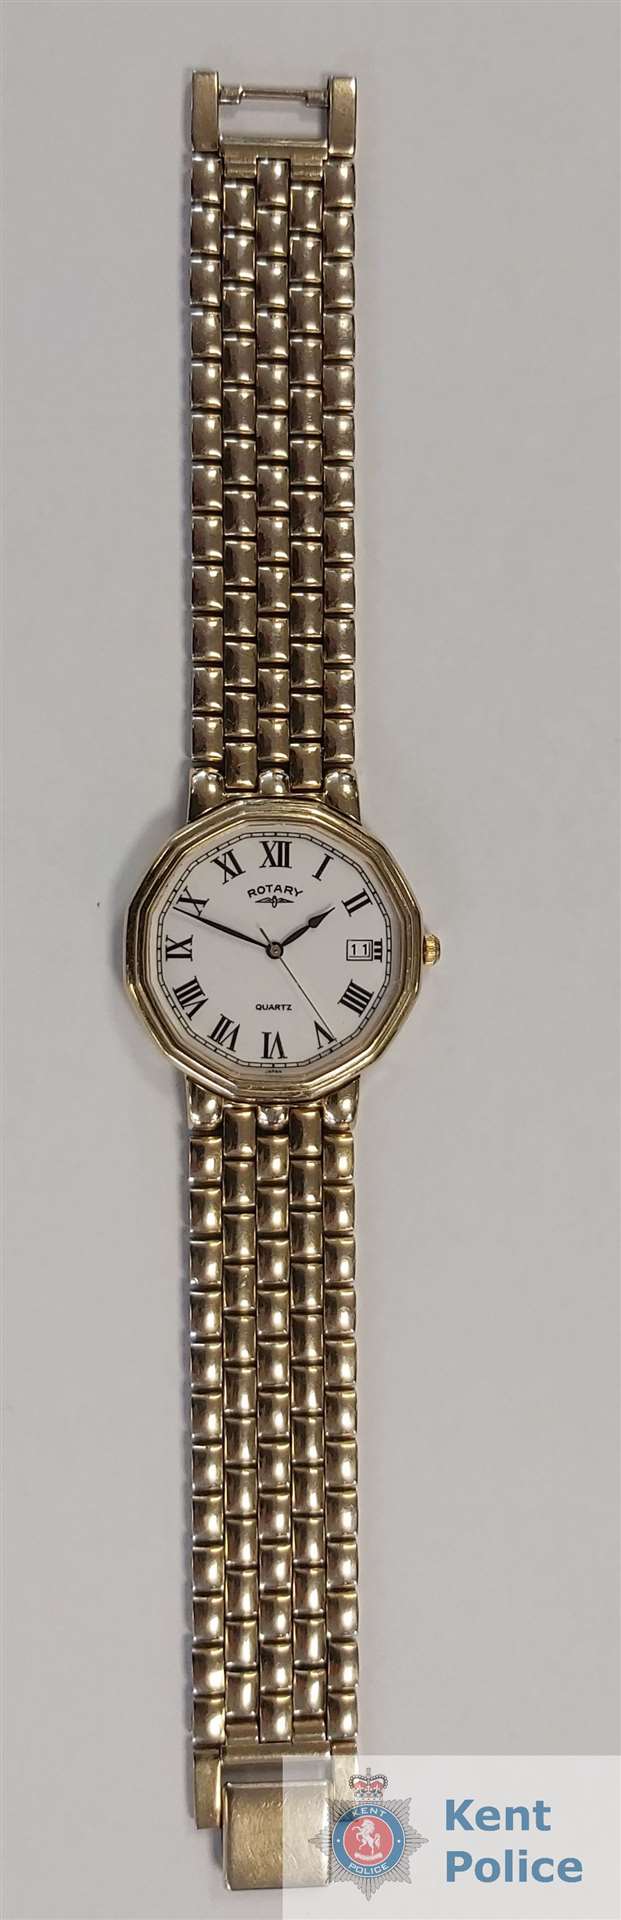 A gold watch recovered by police in Bensted, Ashford